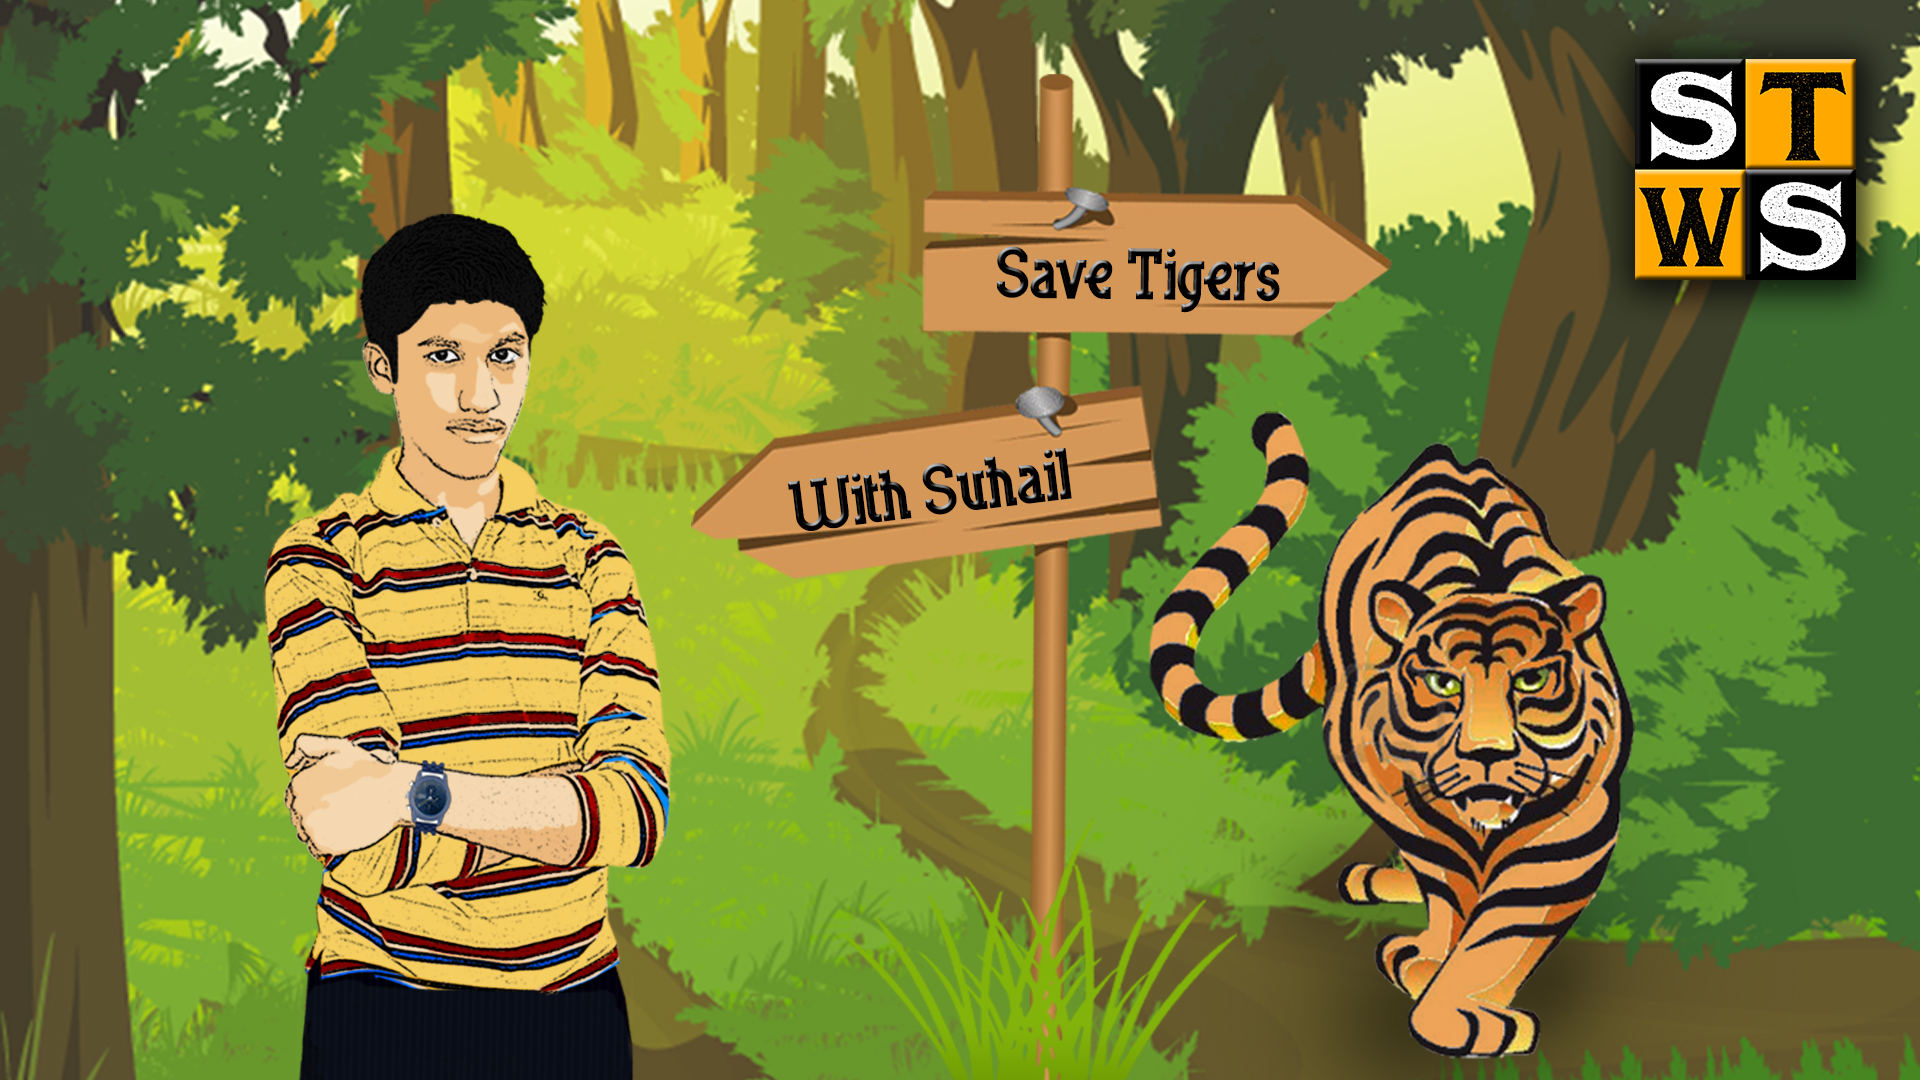 Save Tigers With Suhail